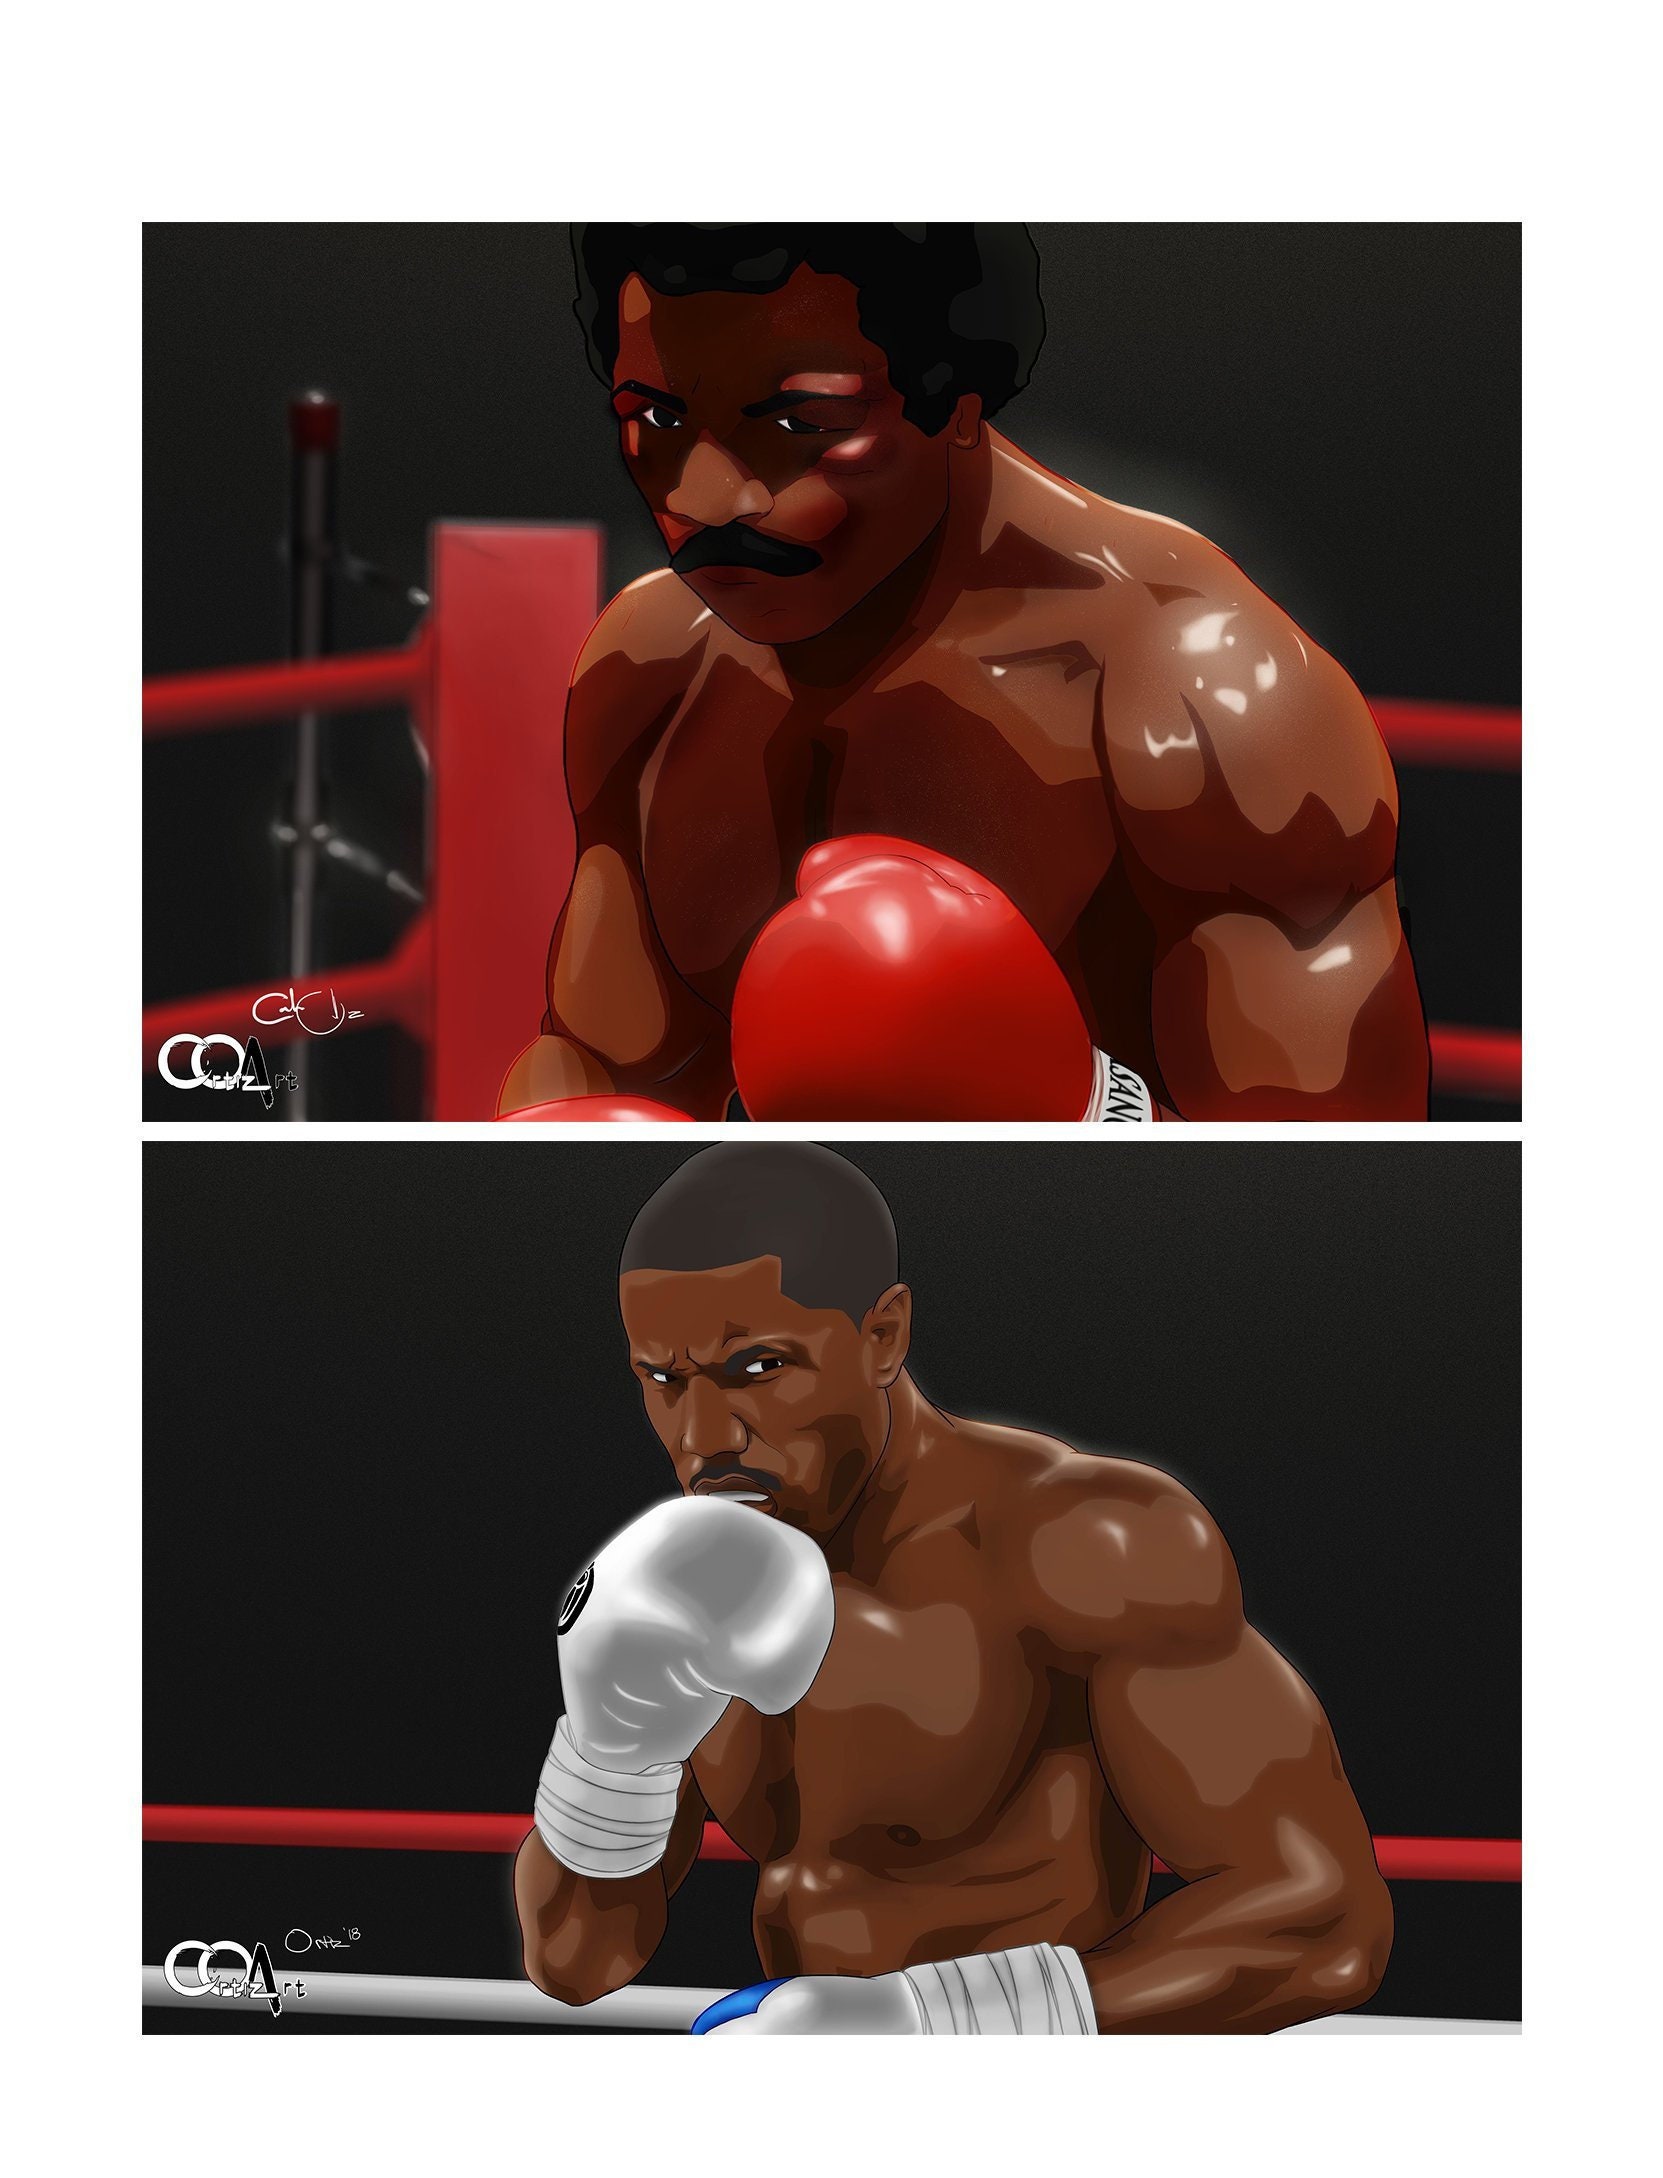 Apollo and Adonis Creed image